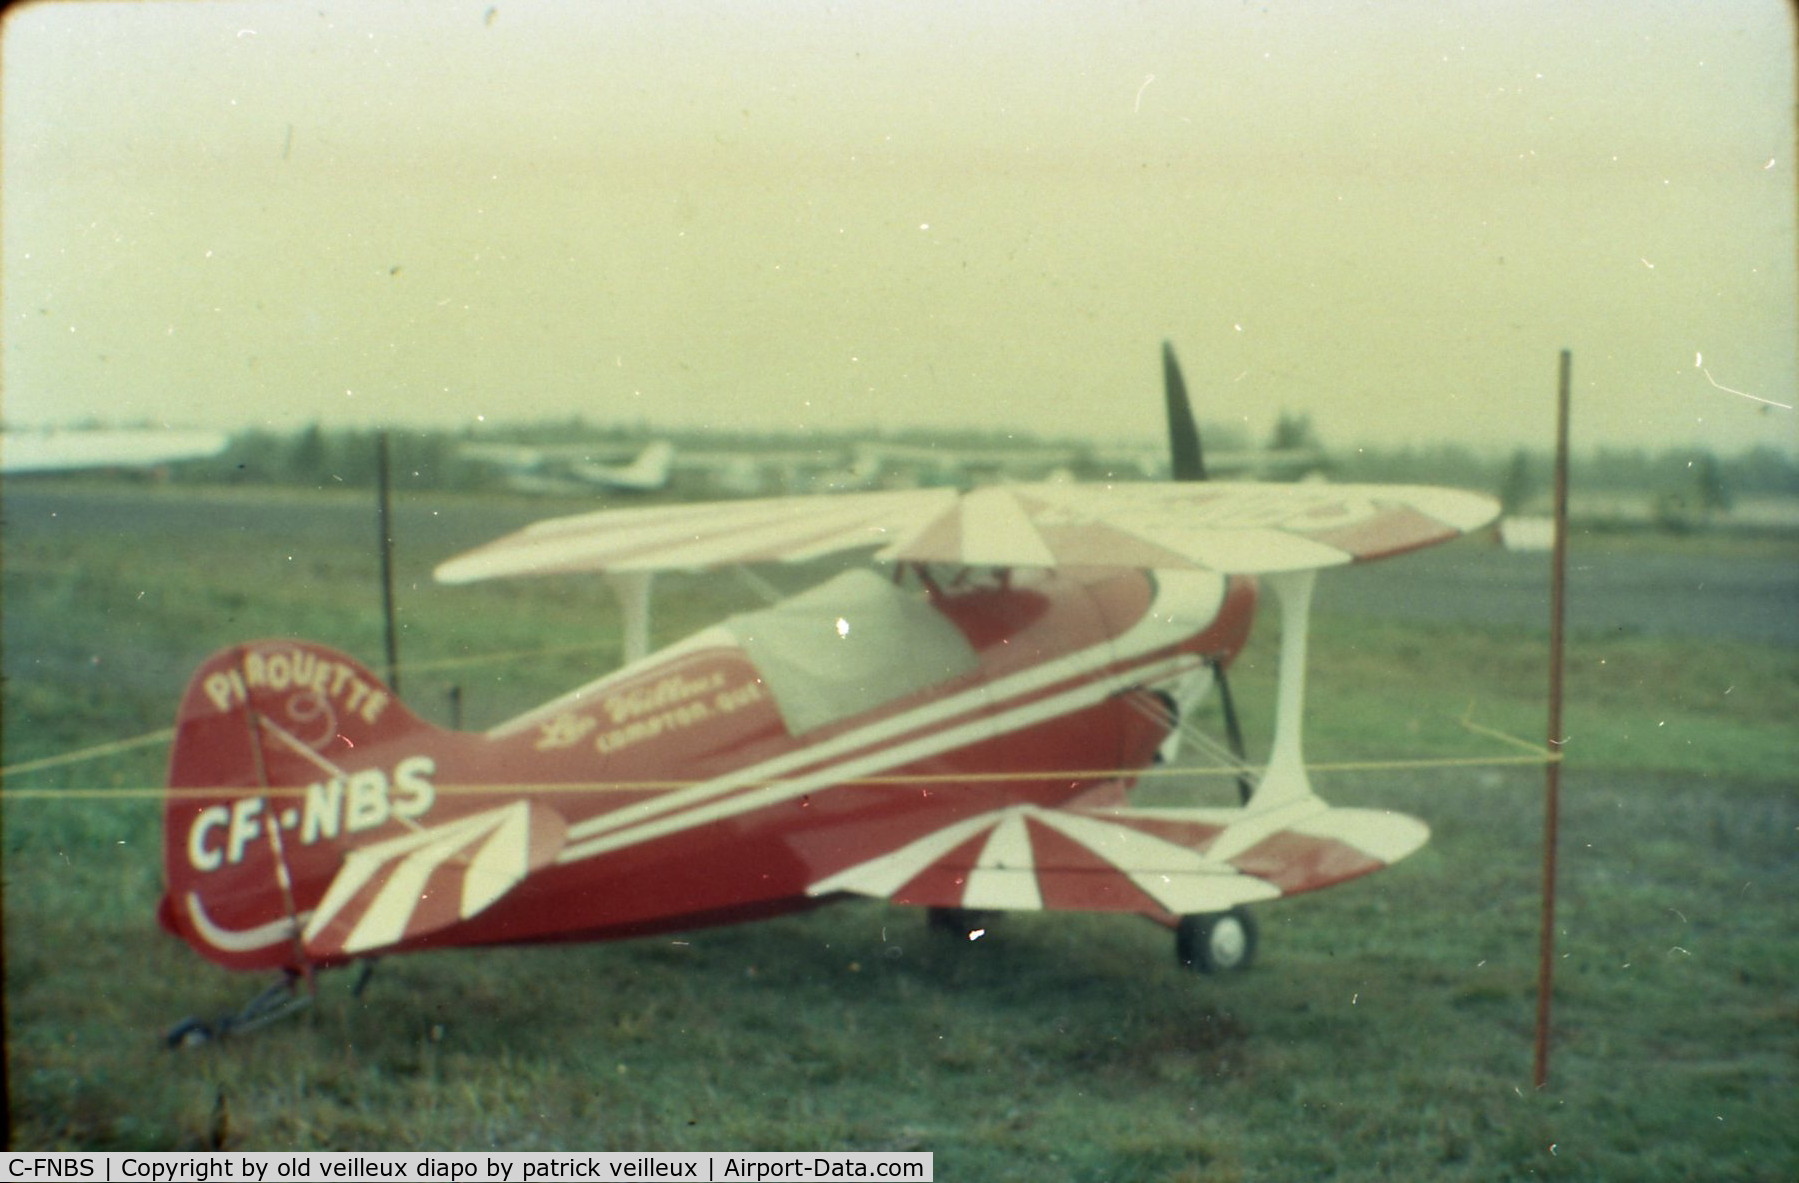 C-FNBS, 1969 Pitts S-1C Special C/N LV1003, my grand father leo veilleux. story sais he built this kit plane. picture taken at is personal airport compton quebec